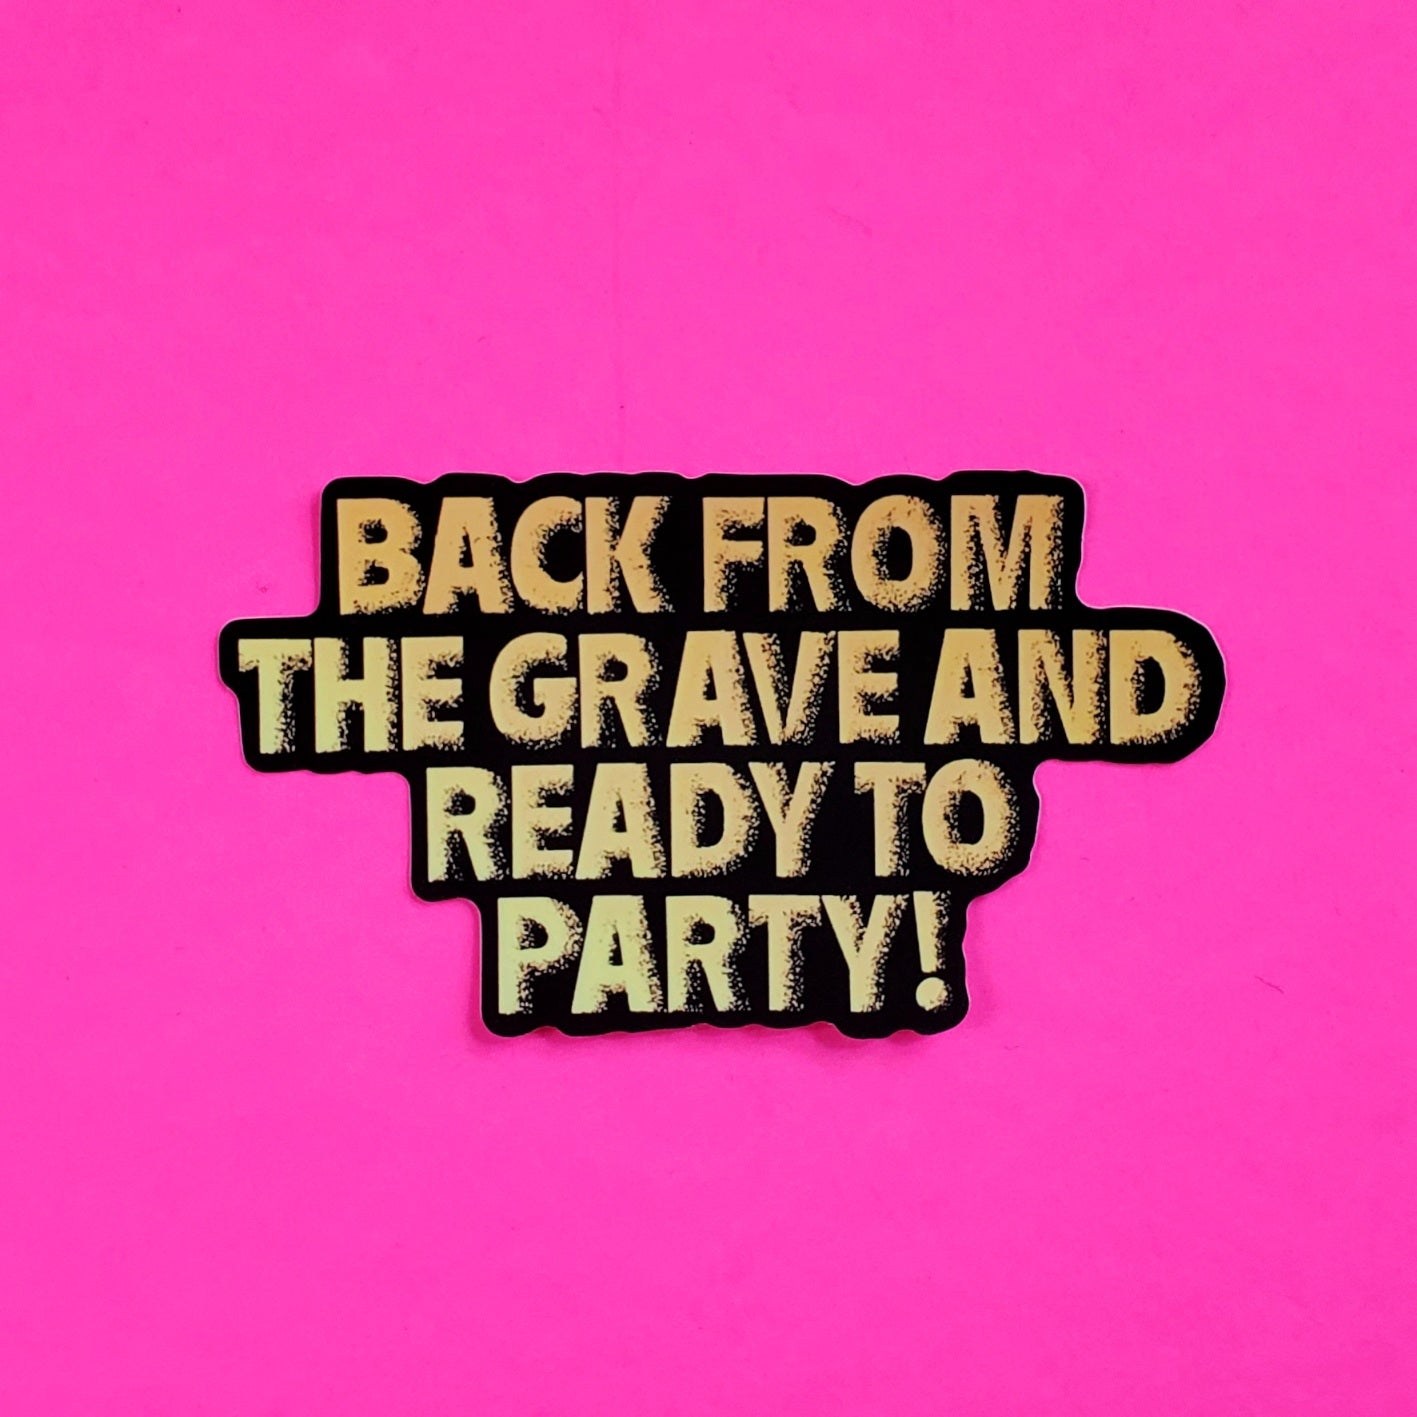 gold lamé woven patch printed with the tagline from the 80s cult zombie movie The Return of the Living Dead: “BACK FROM THE GRAVE AND READY TO PARTY!” written in gold lamé on a black background with gold lamé border